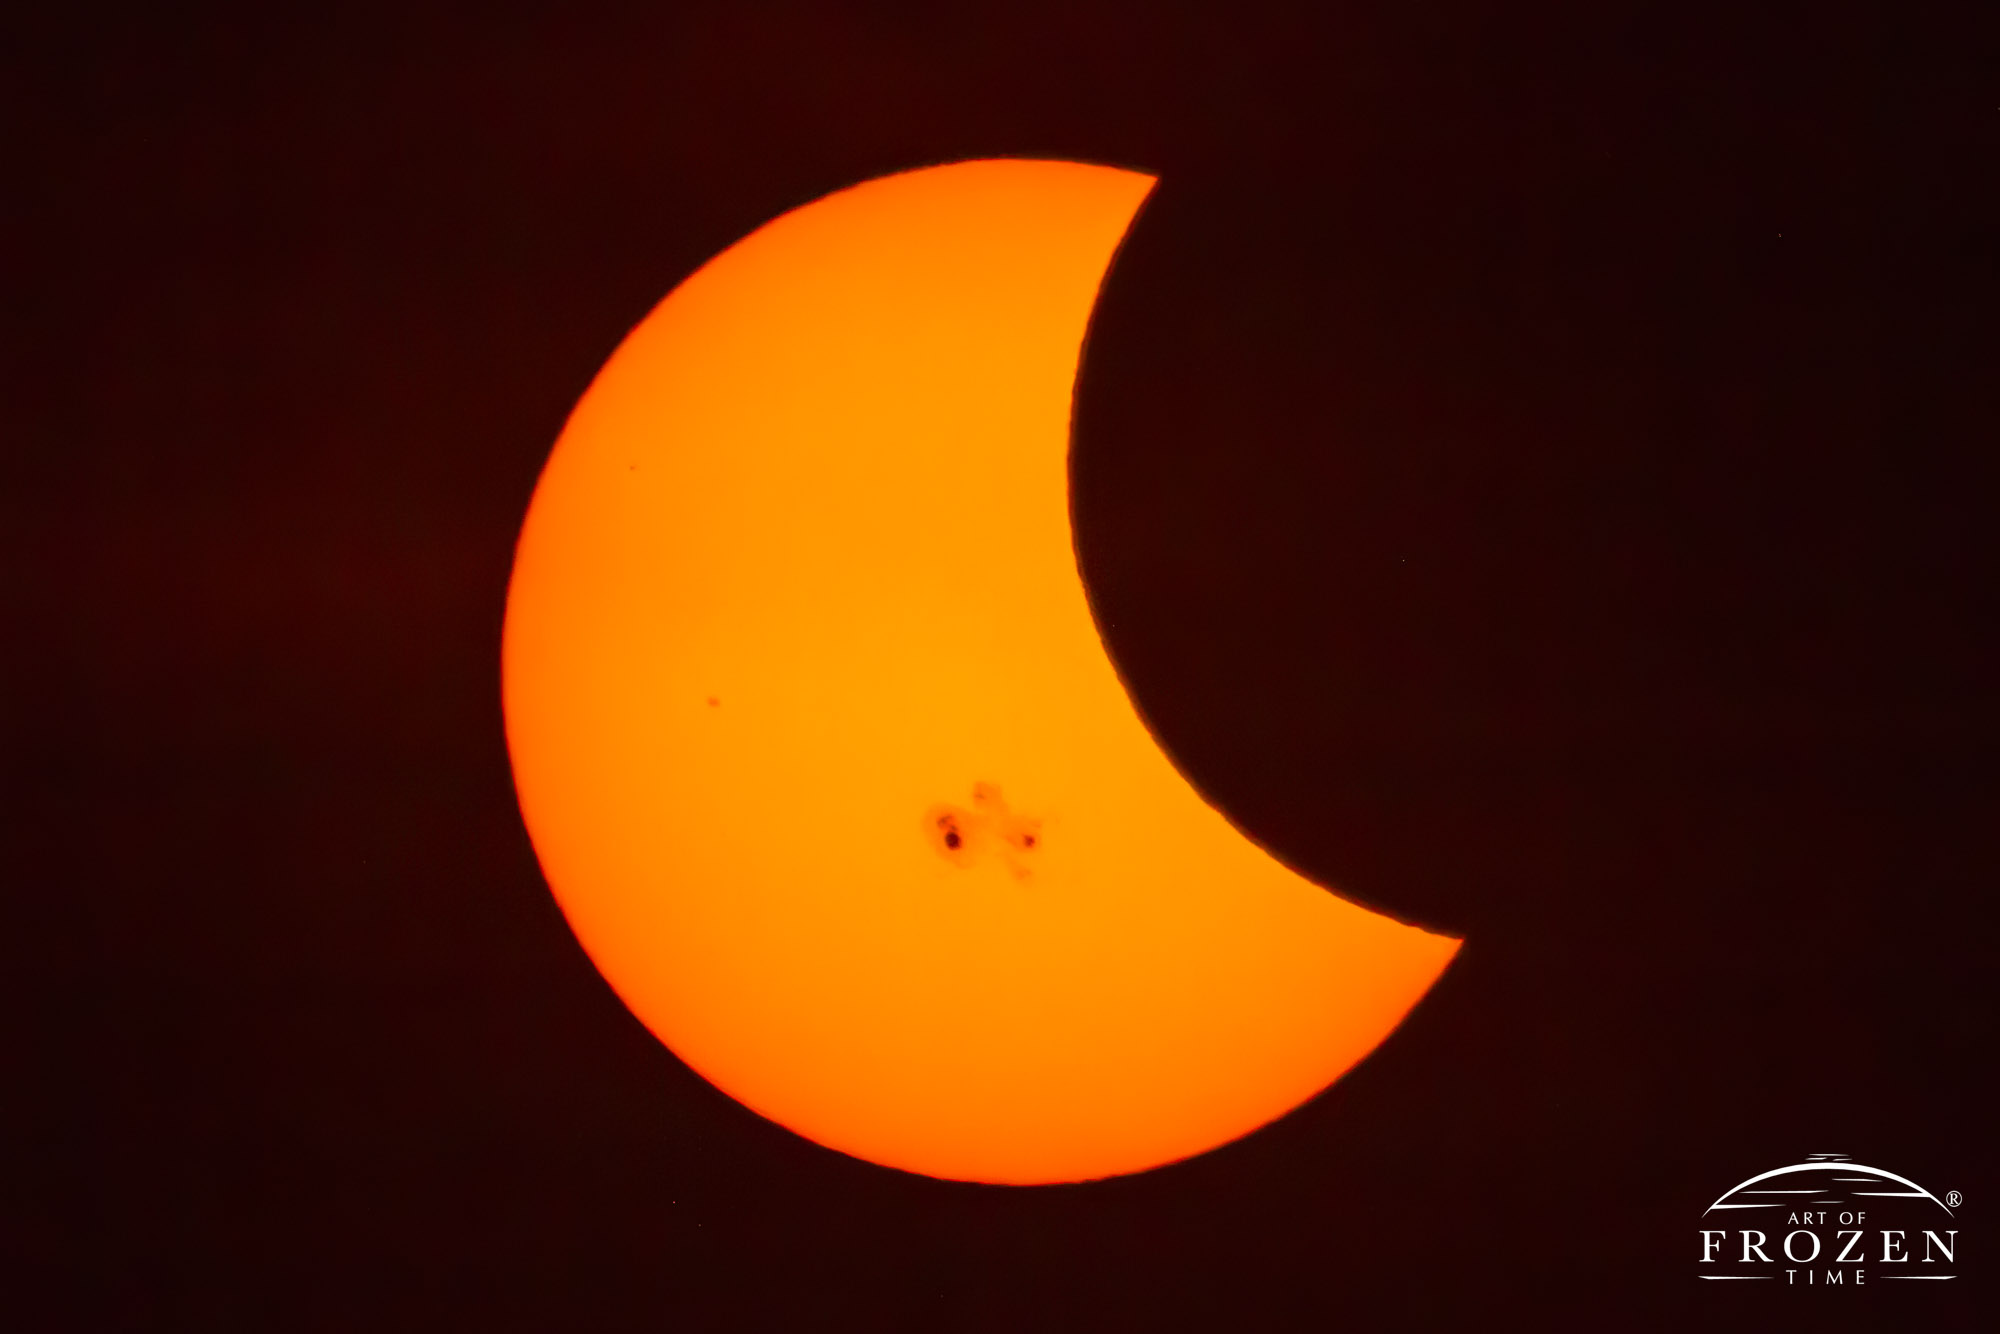 A close up view of a solar eclipse and prominent sunspot where the moon partially obscures the sun